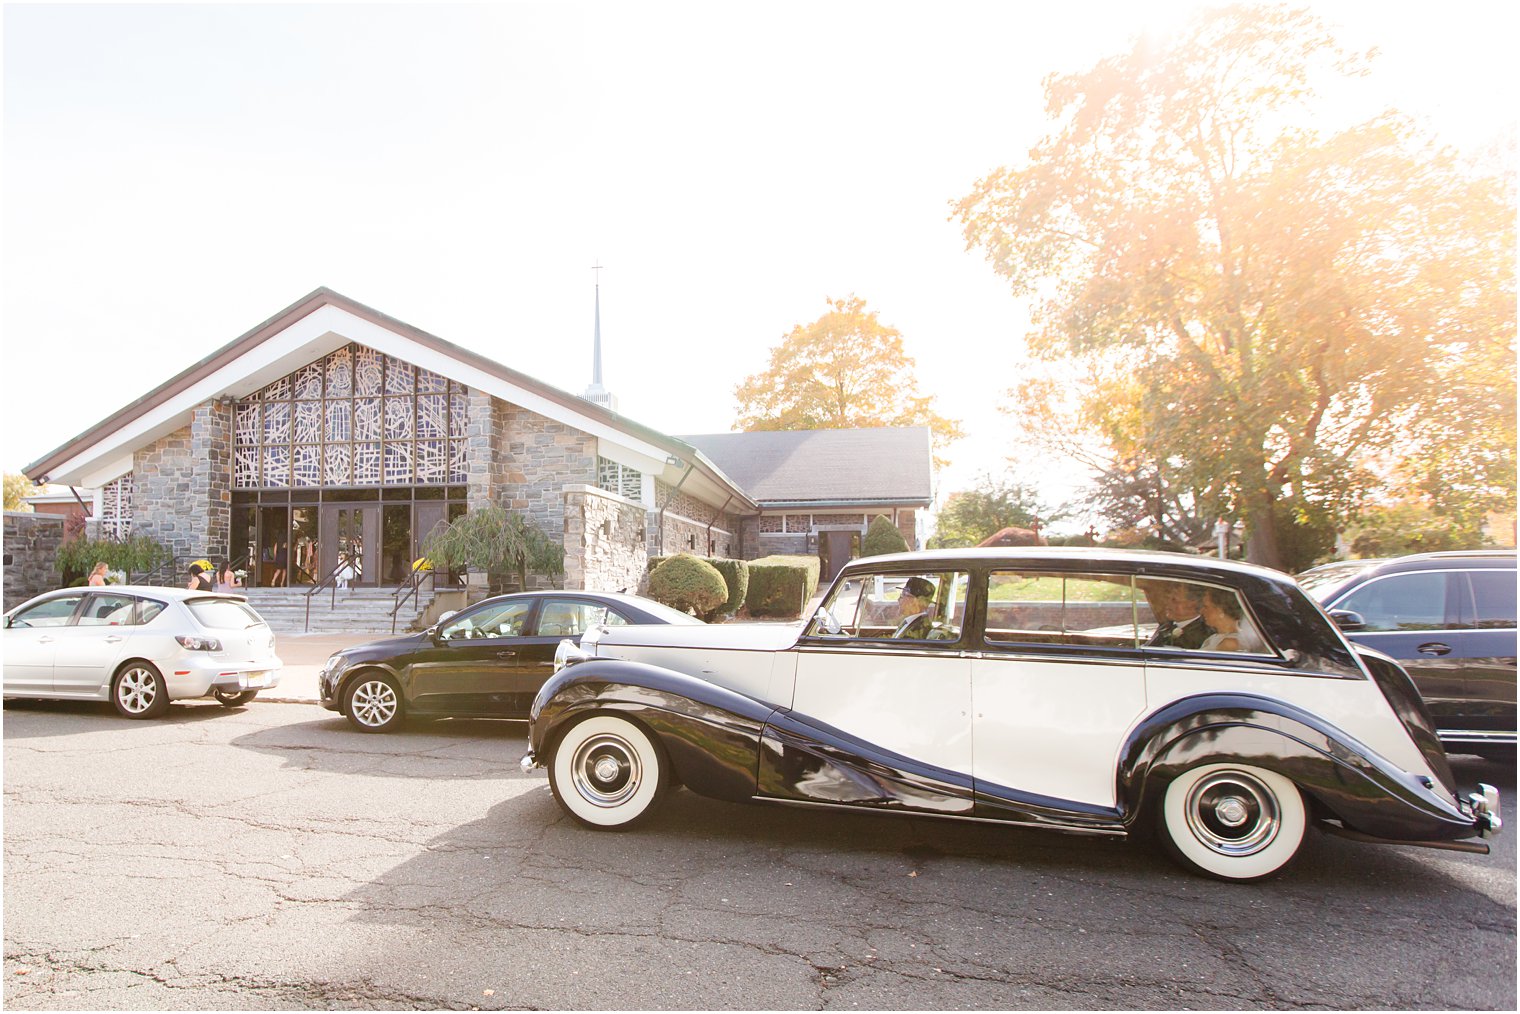 classic car pulls up bride to church for wedding ceremony